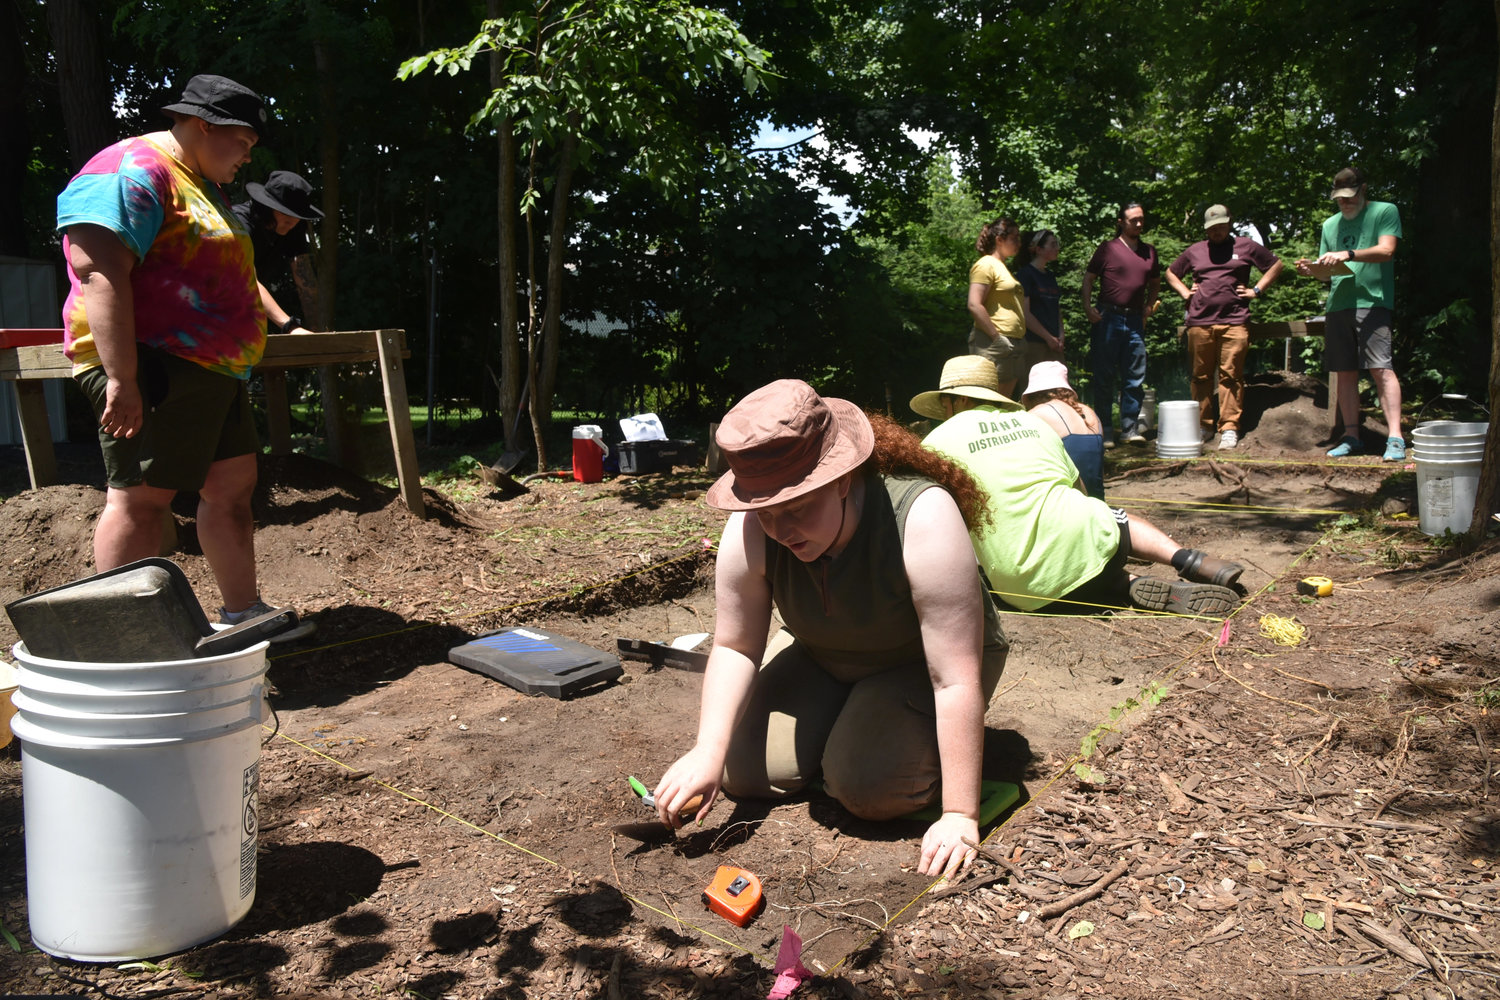 SUNY New Paltz students work on a dig at the Pine Street African Burial Ground in Kingston on Wednesday, July 13, 2022.